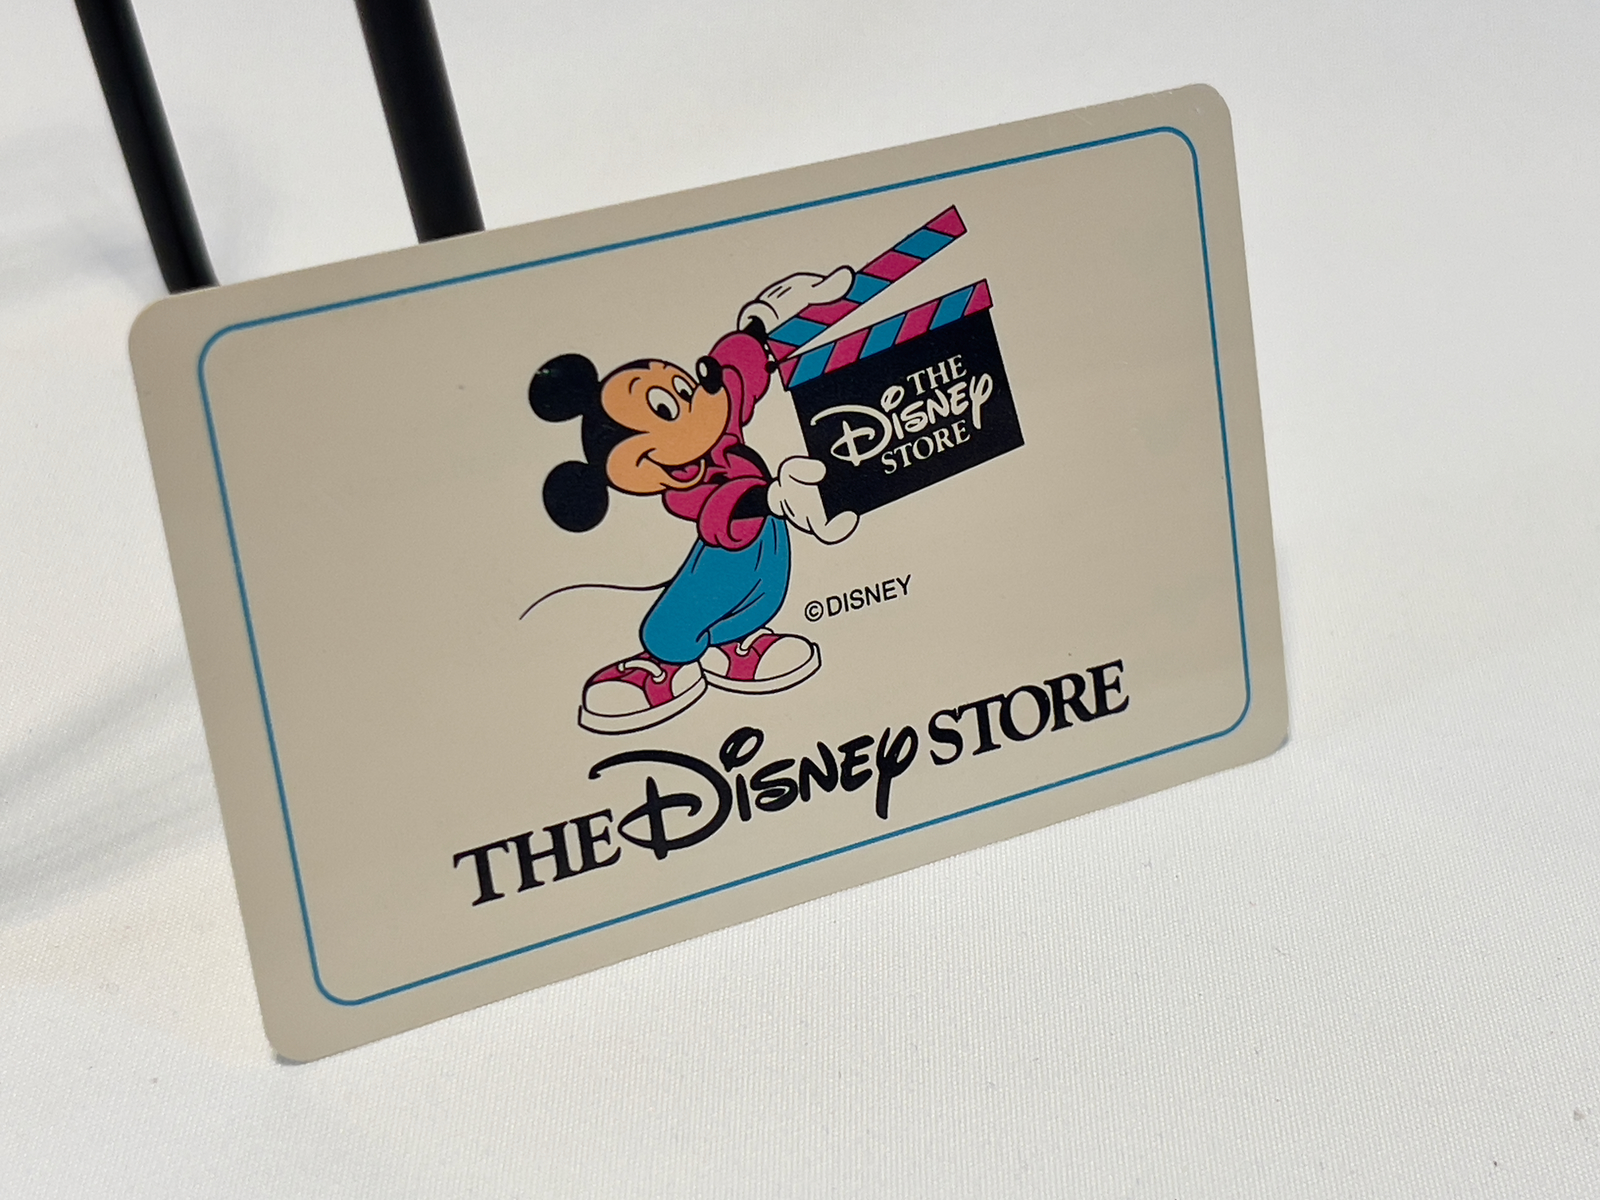 Primary image for RARE "The Disney Store Look" and Mission Statement Card from The Disney Store.